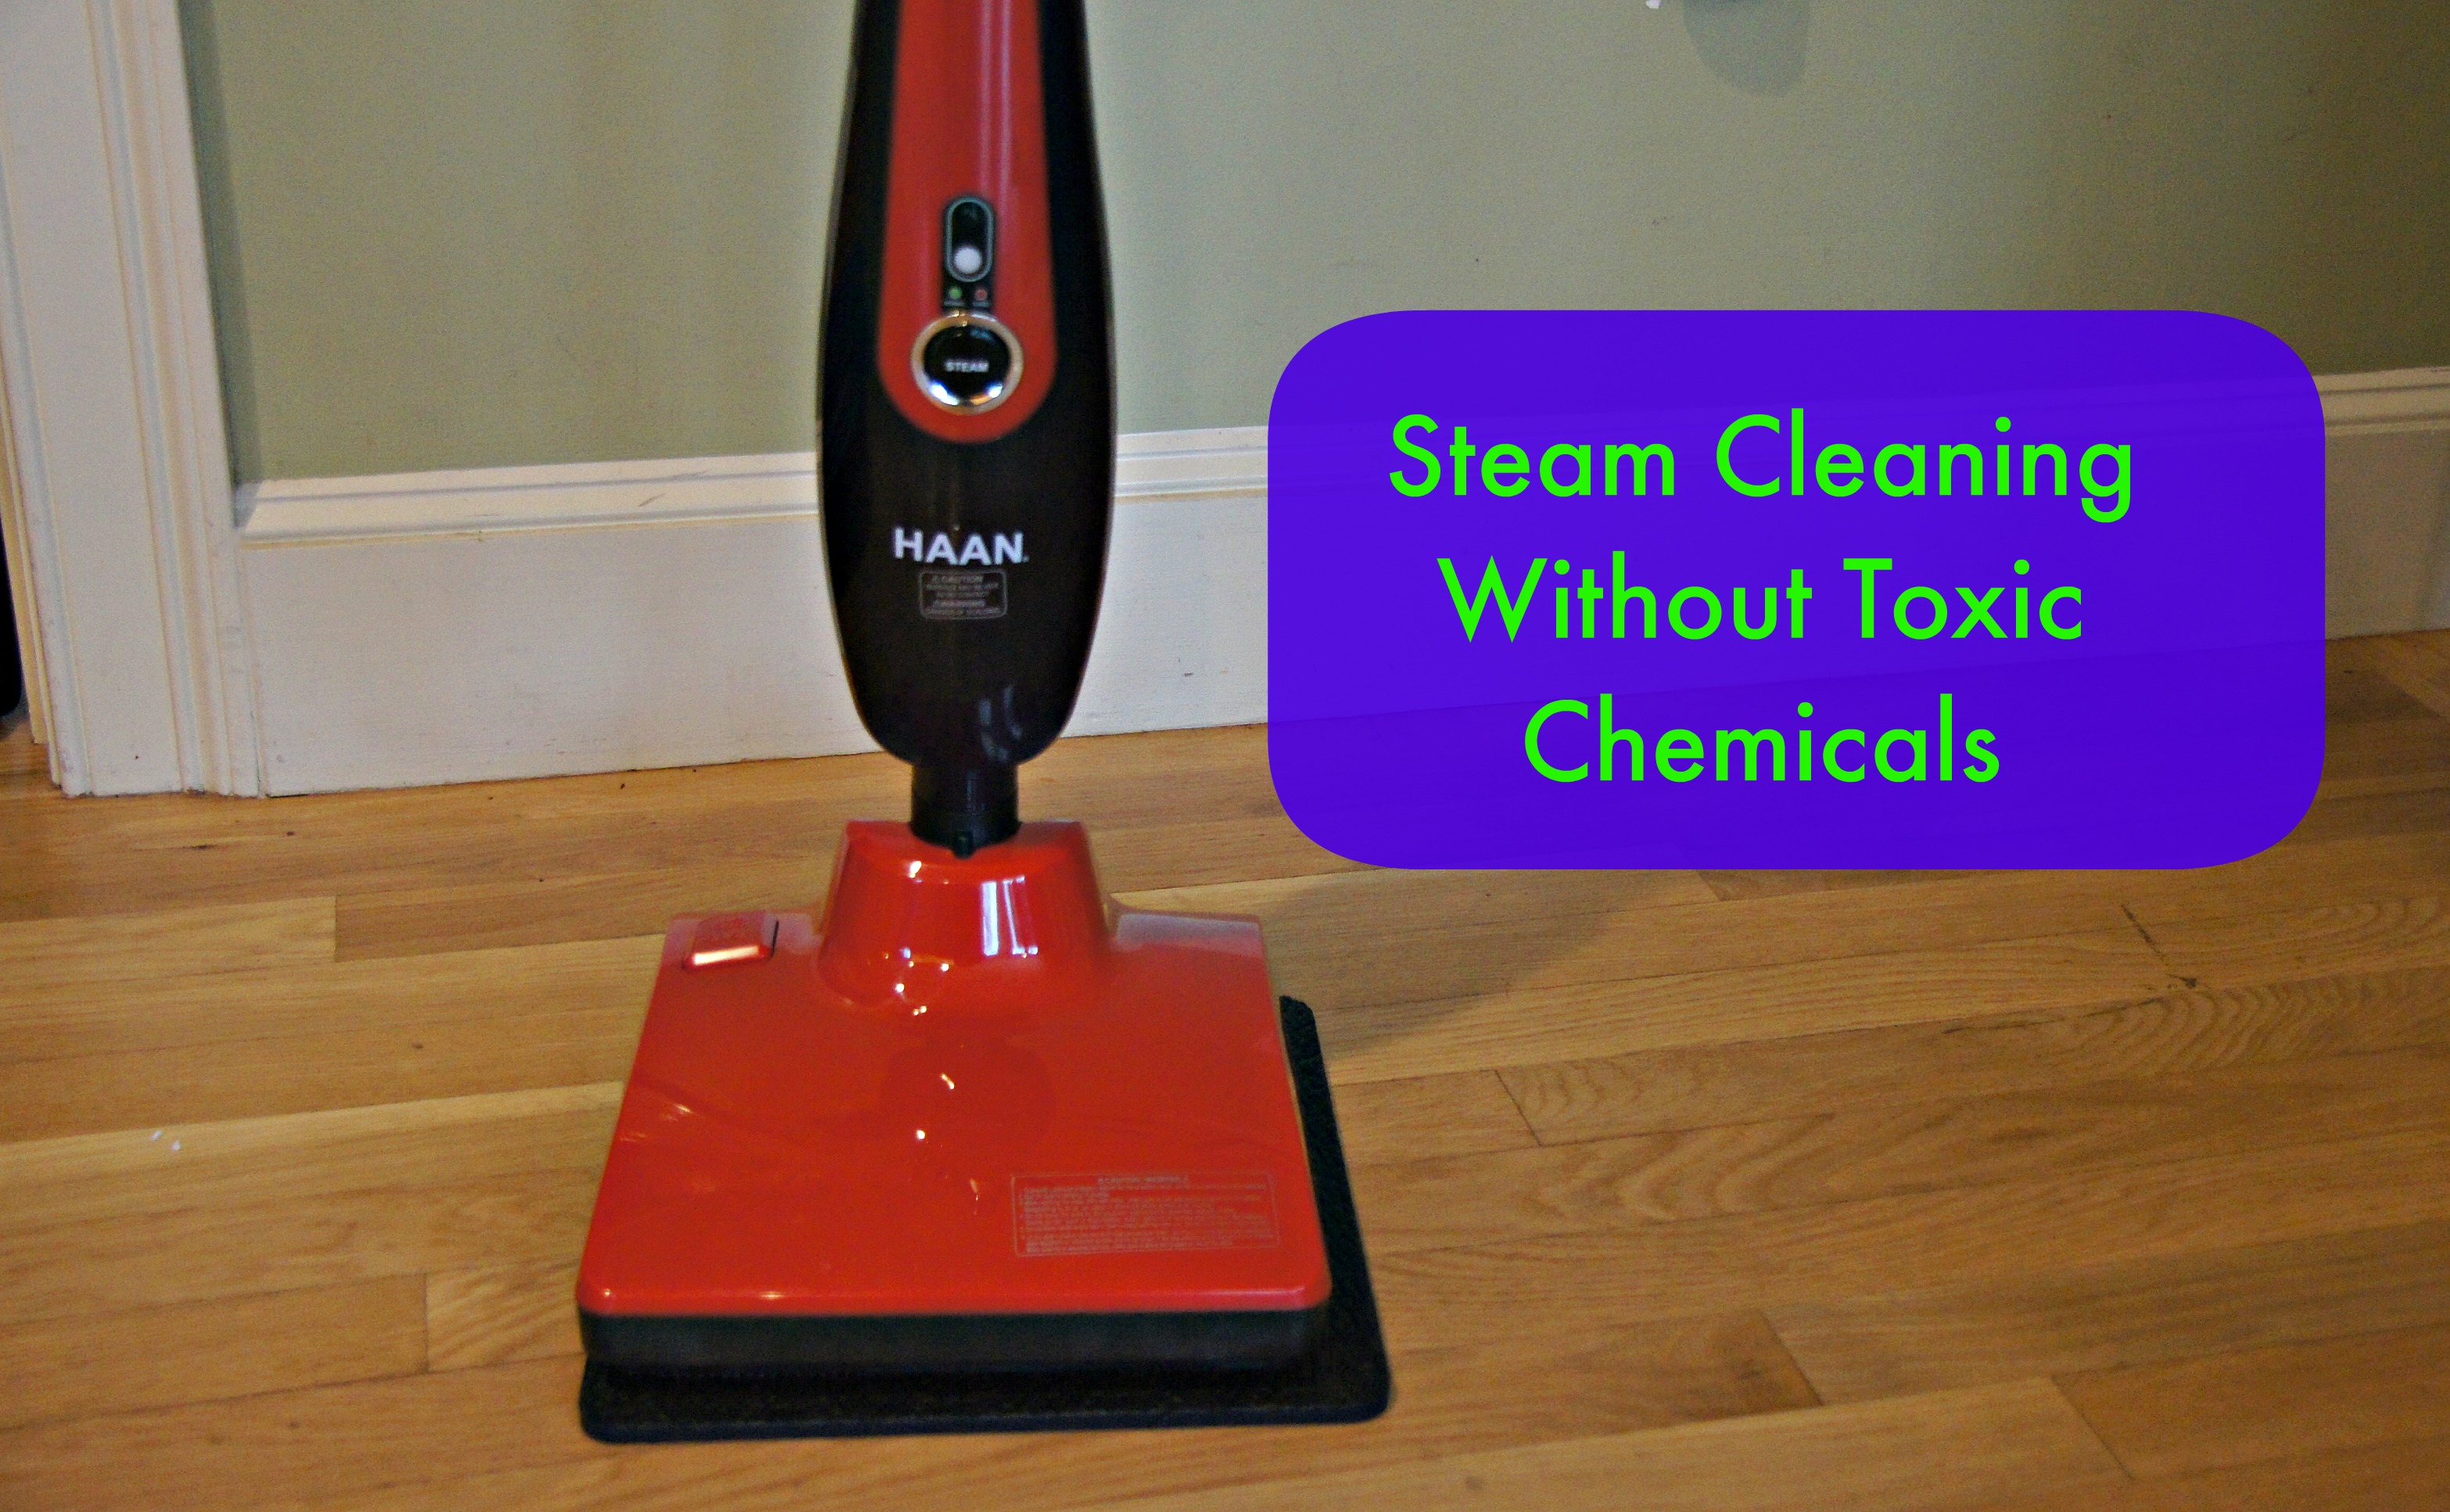 Steam Cleaning Without Toxic Chemicals Haan Review